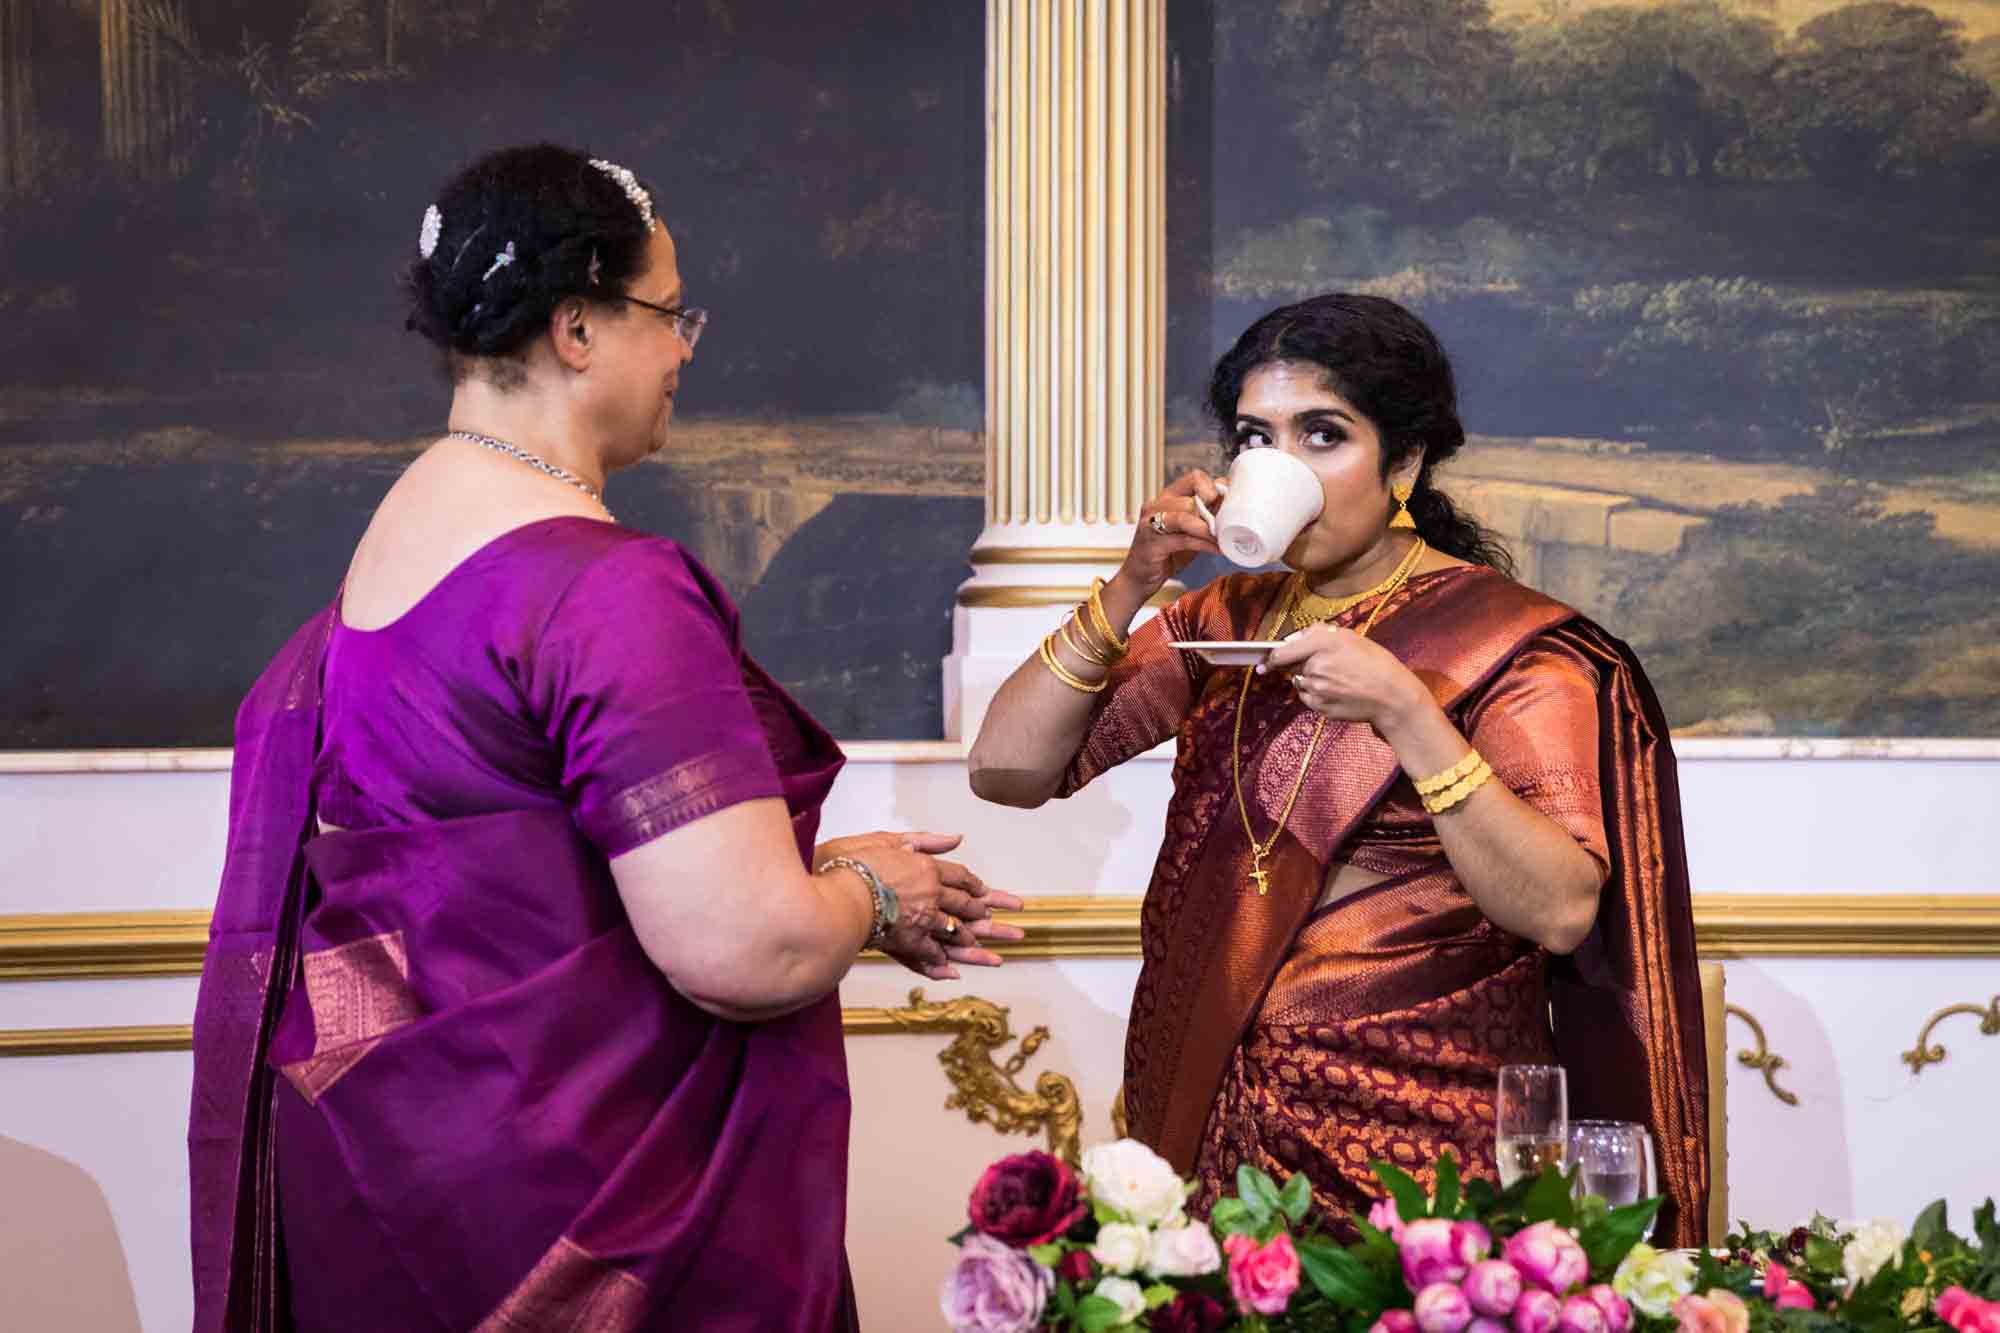 Indian bride wearing rust colored sari and drinking from teacup in front of older woman wearing pink sari during a Terrace on the Park wedding